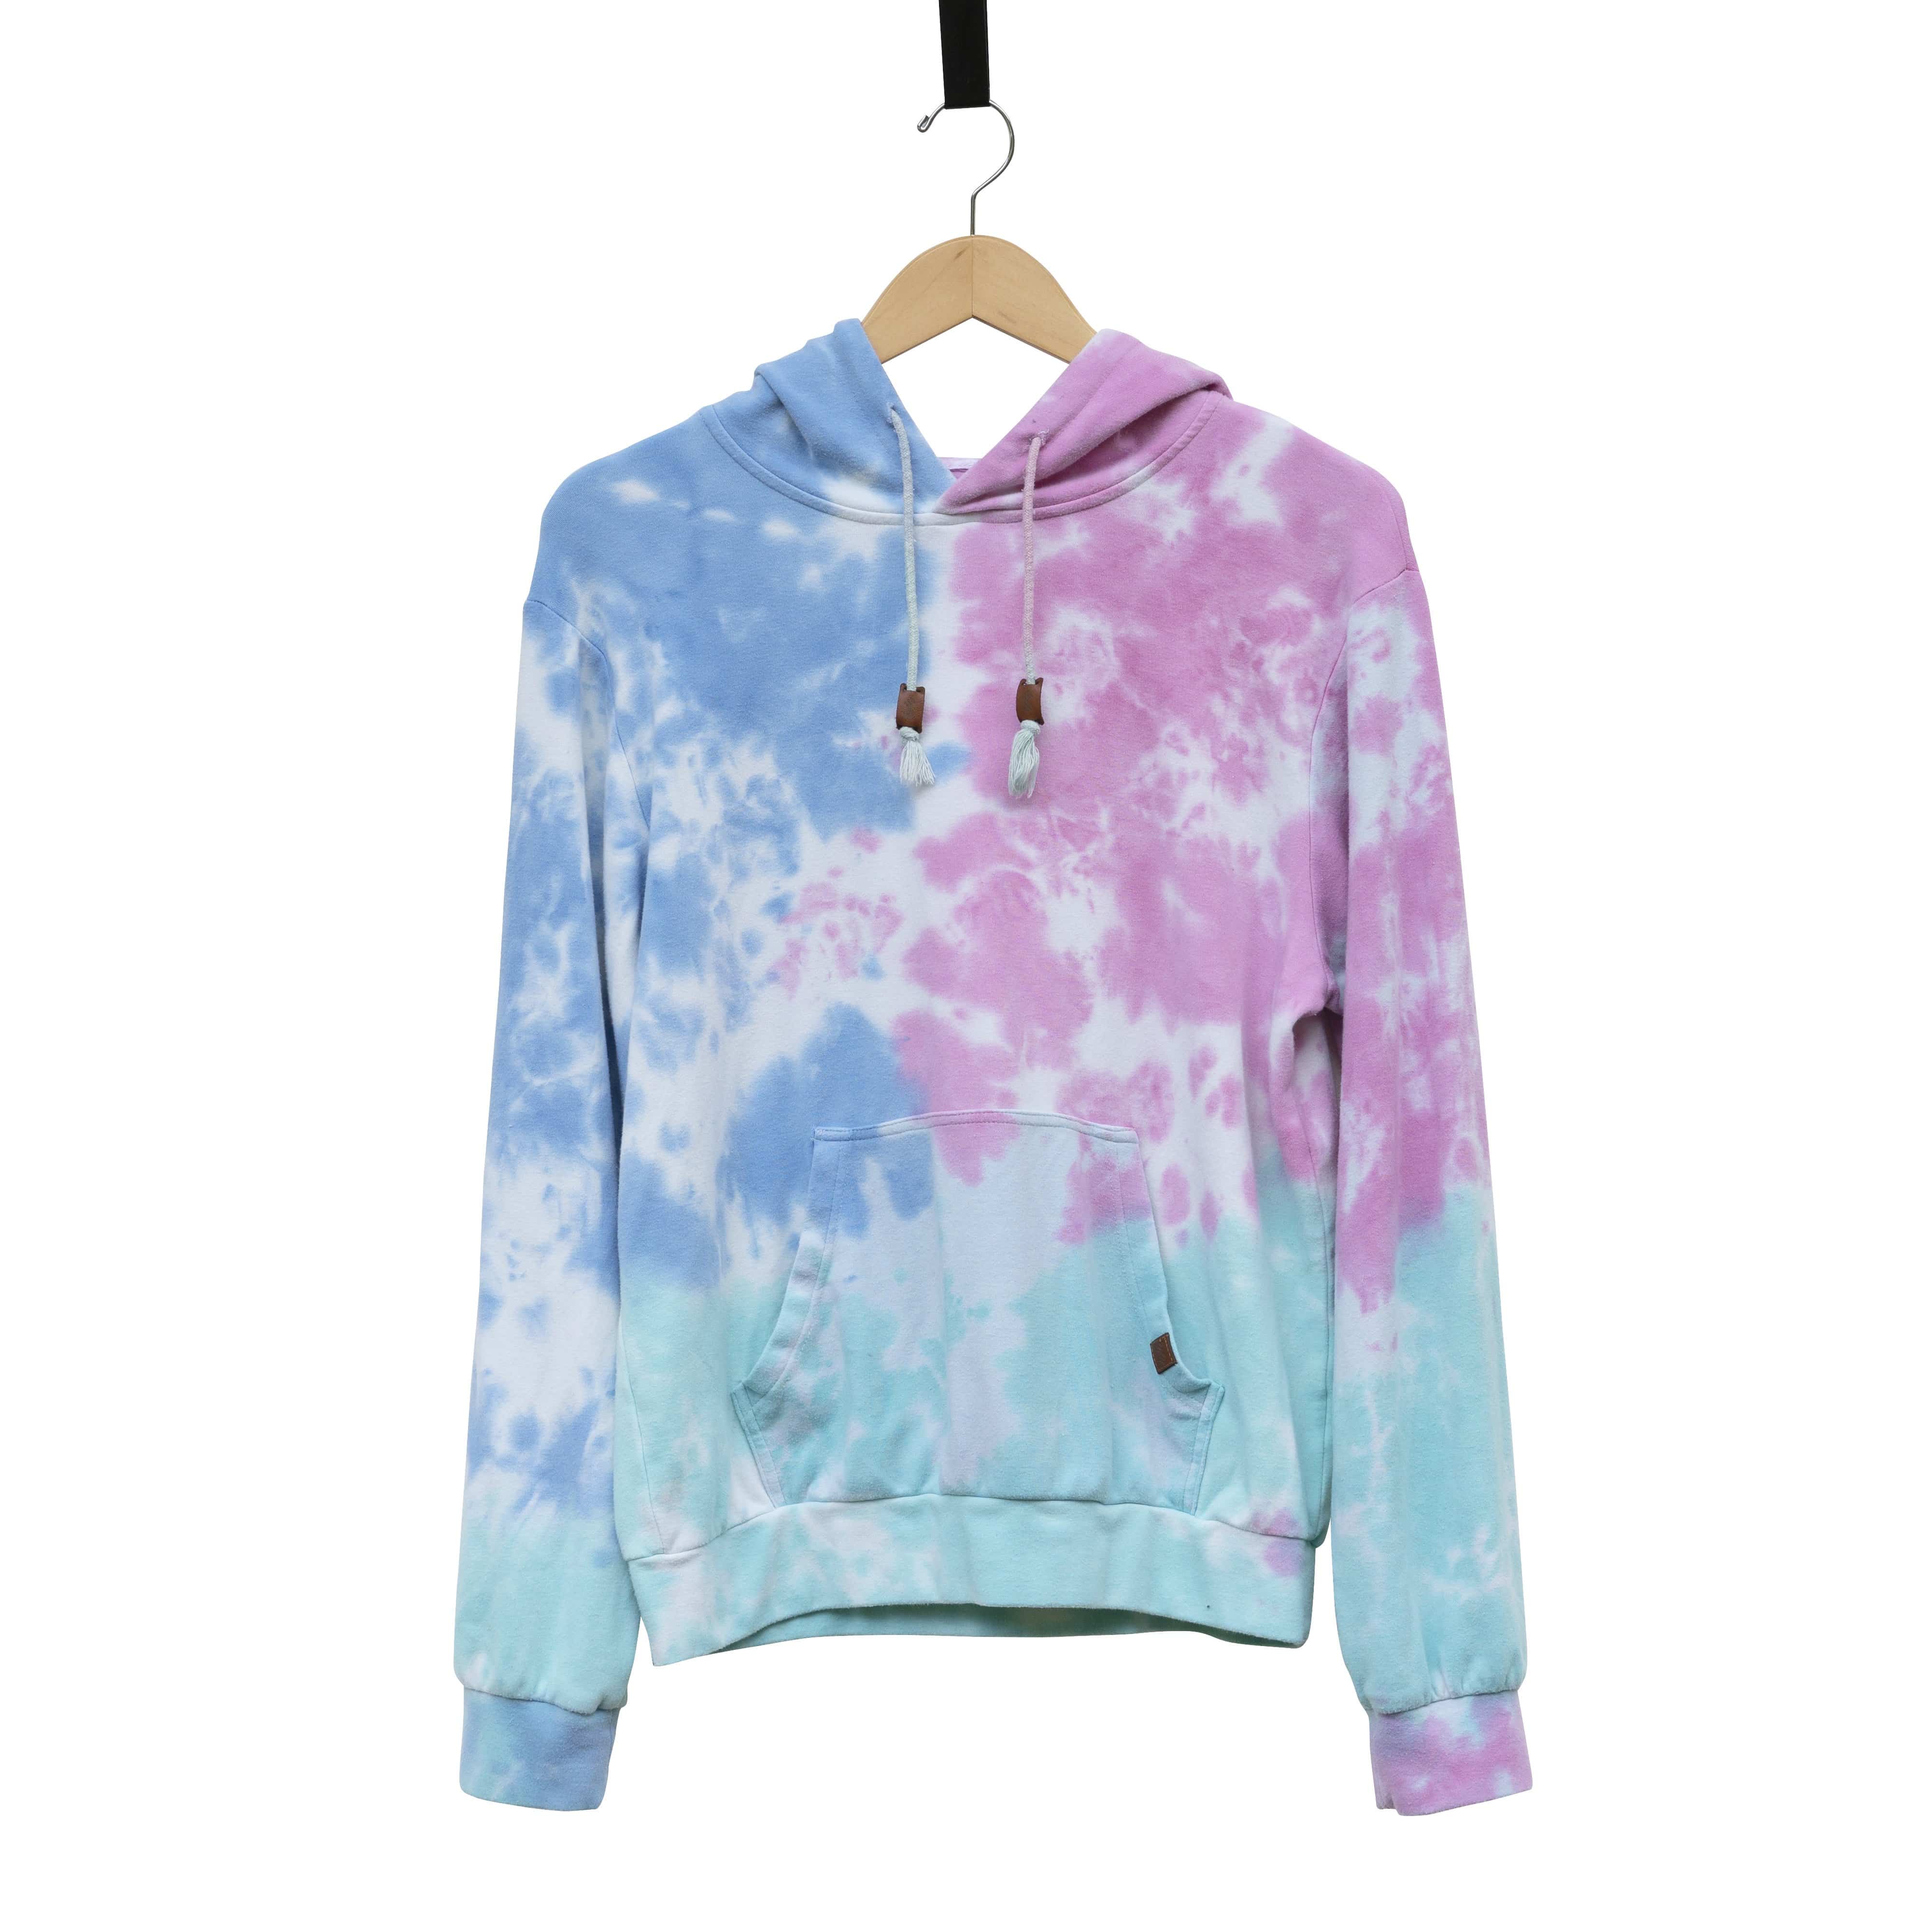 Cotton Candy Cloud Blend Hoodie From SLYK - Front Angle